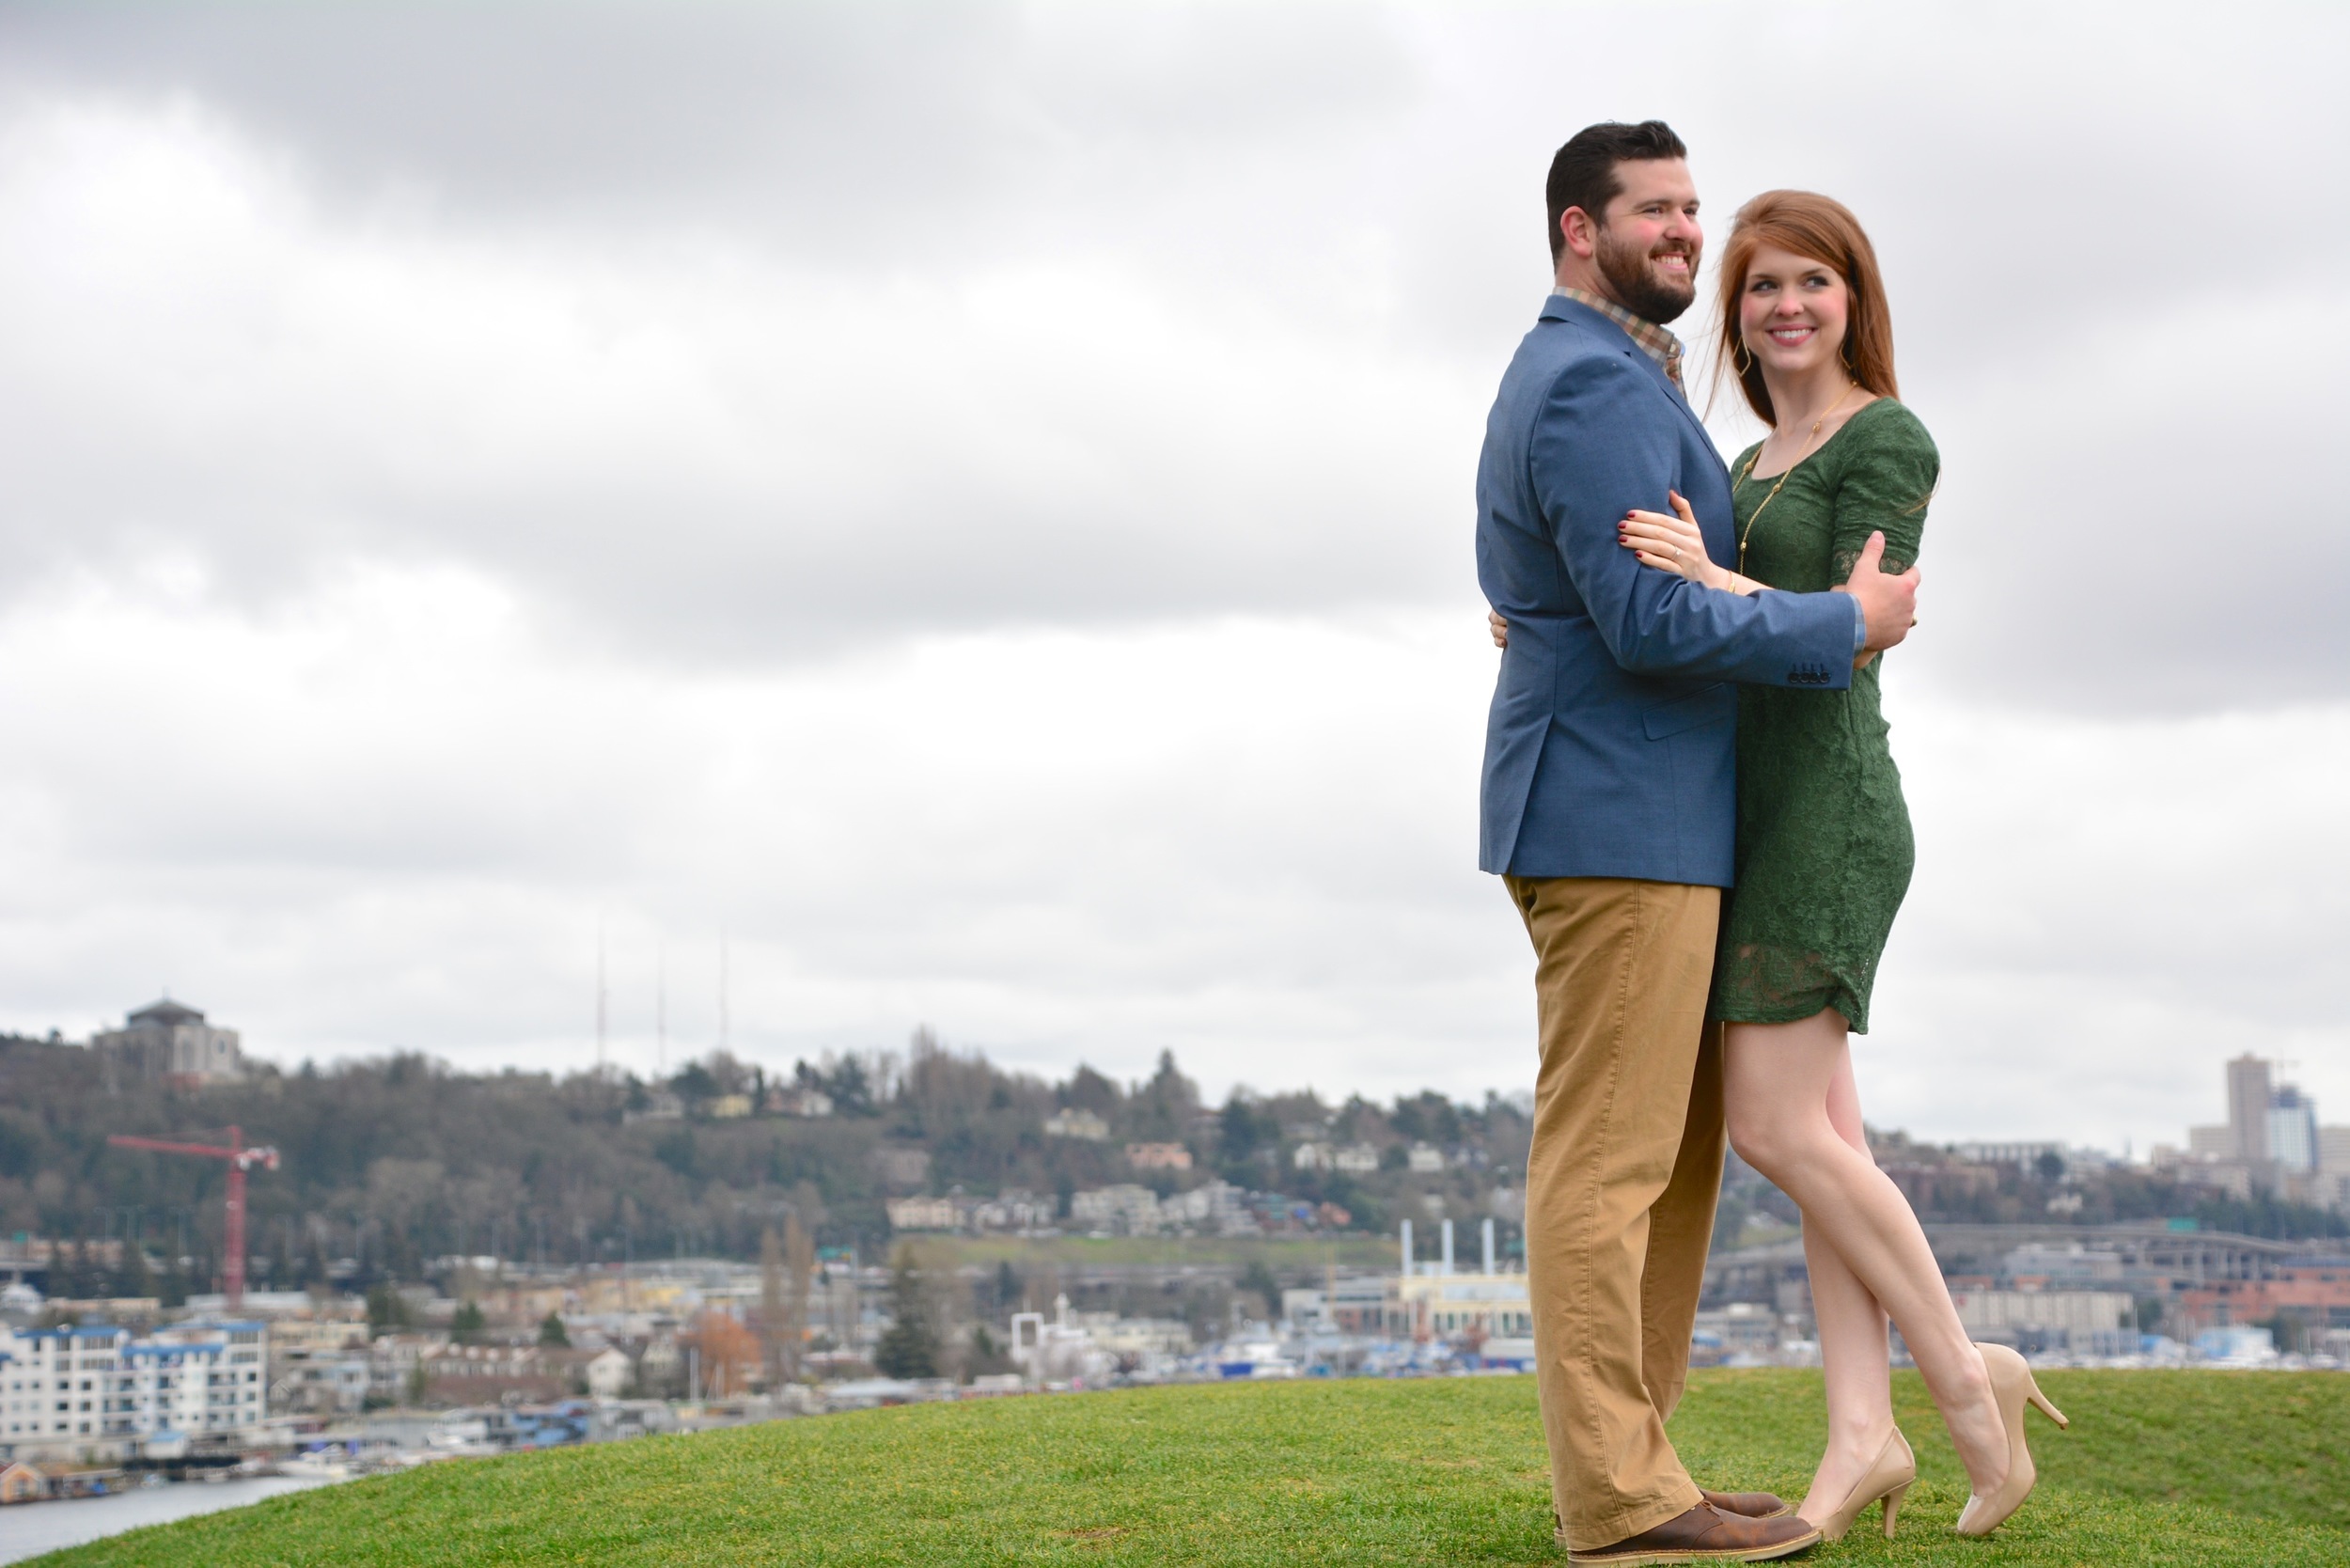 heidi lockhart somes photography, gasworks park, seattle, washington, engagement photos, what to wear for your engagement photos. green lace dress